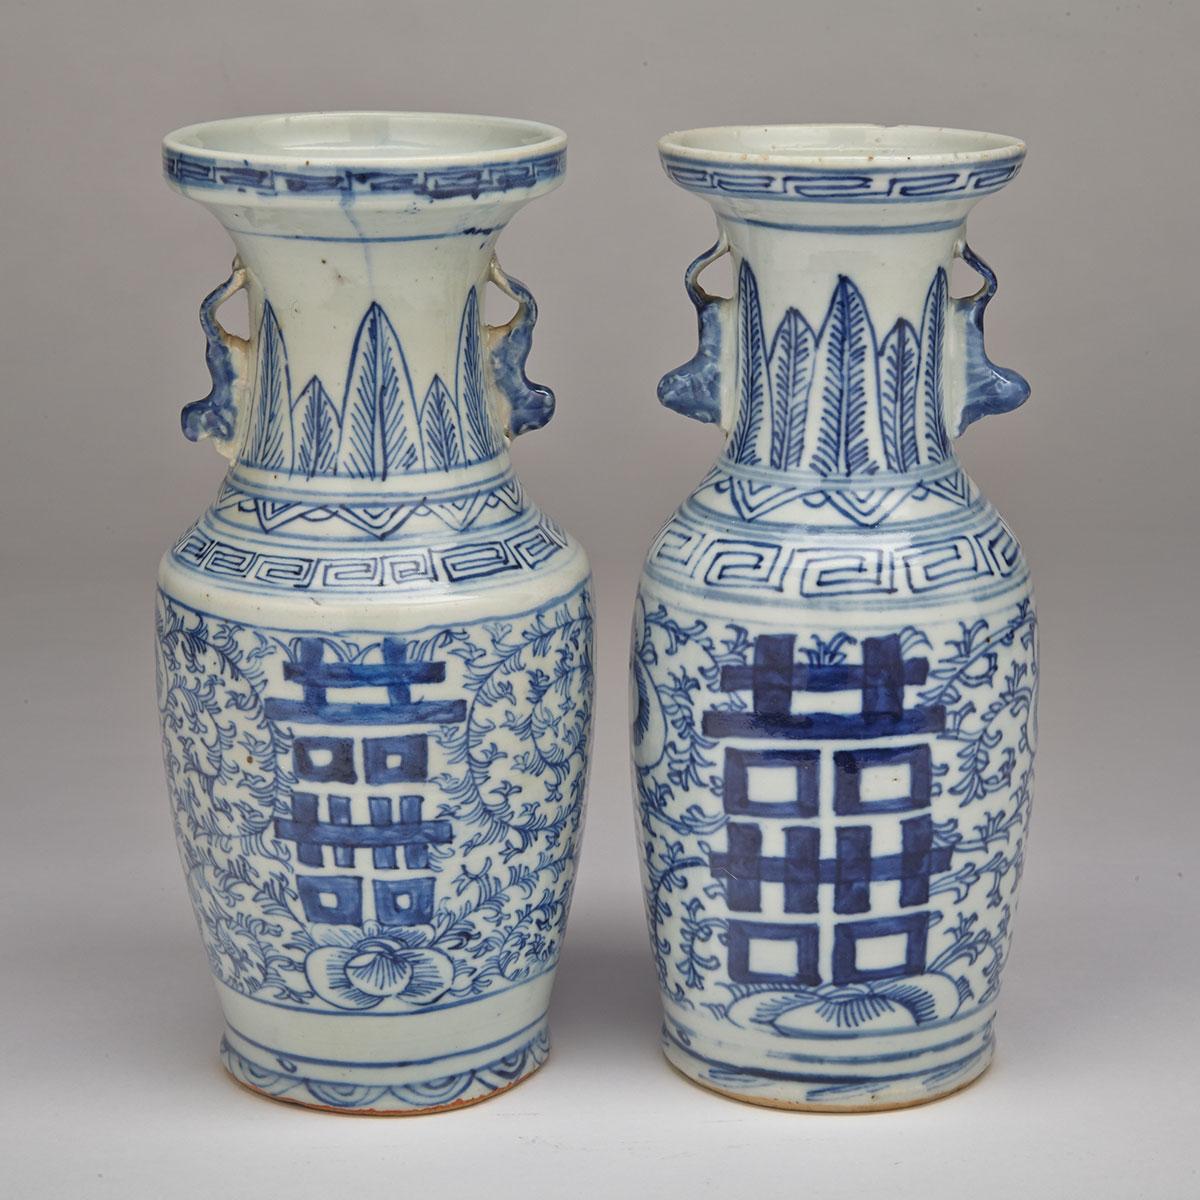 Pair of Blue and White ‘Double Happiness’ Vases, 19th Century